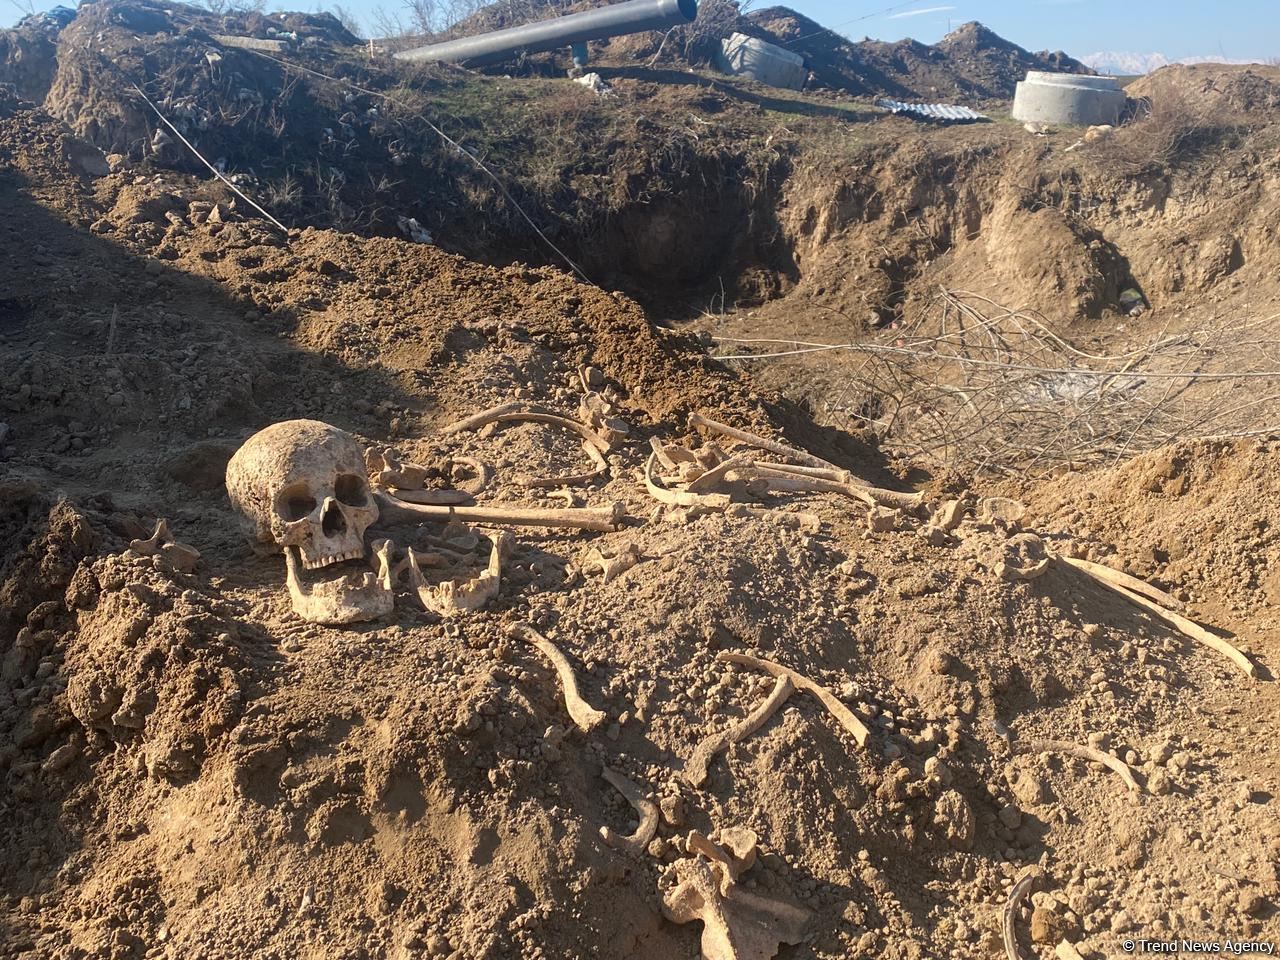 Fragments of human skeleton found in Azerbaijani Aghdam's water canal - Trend TV